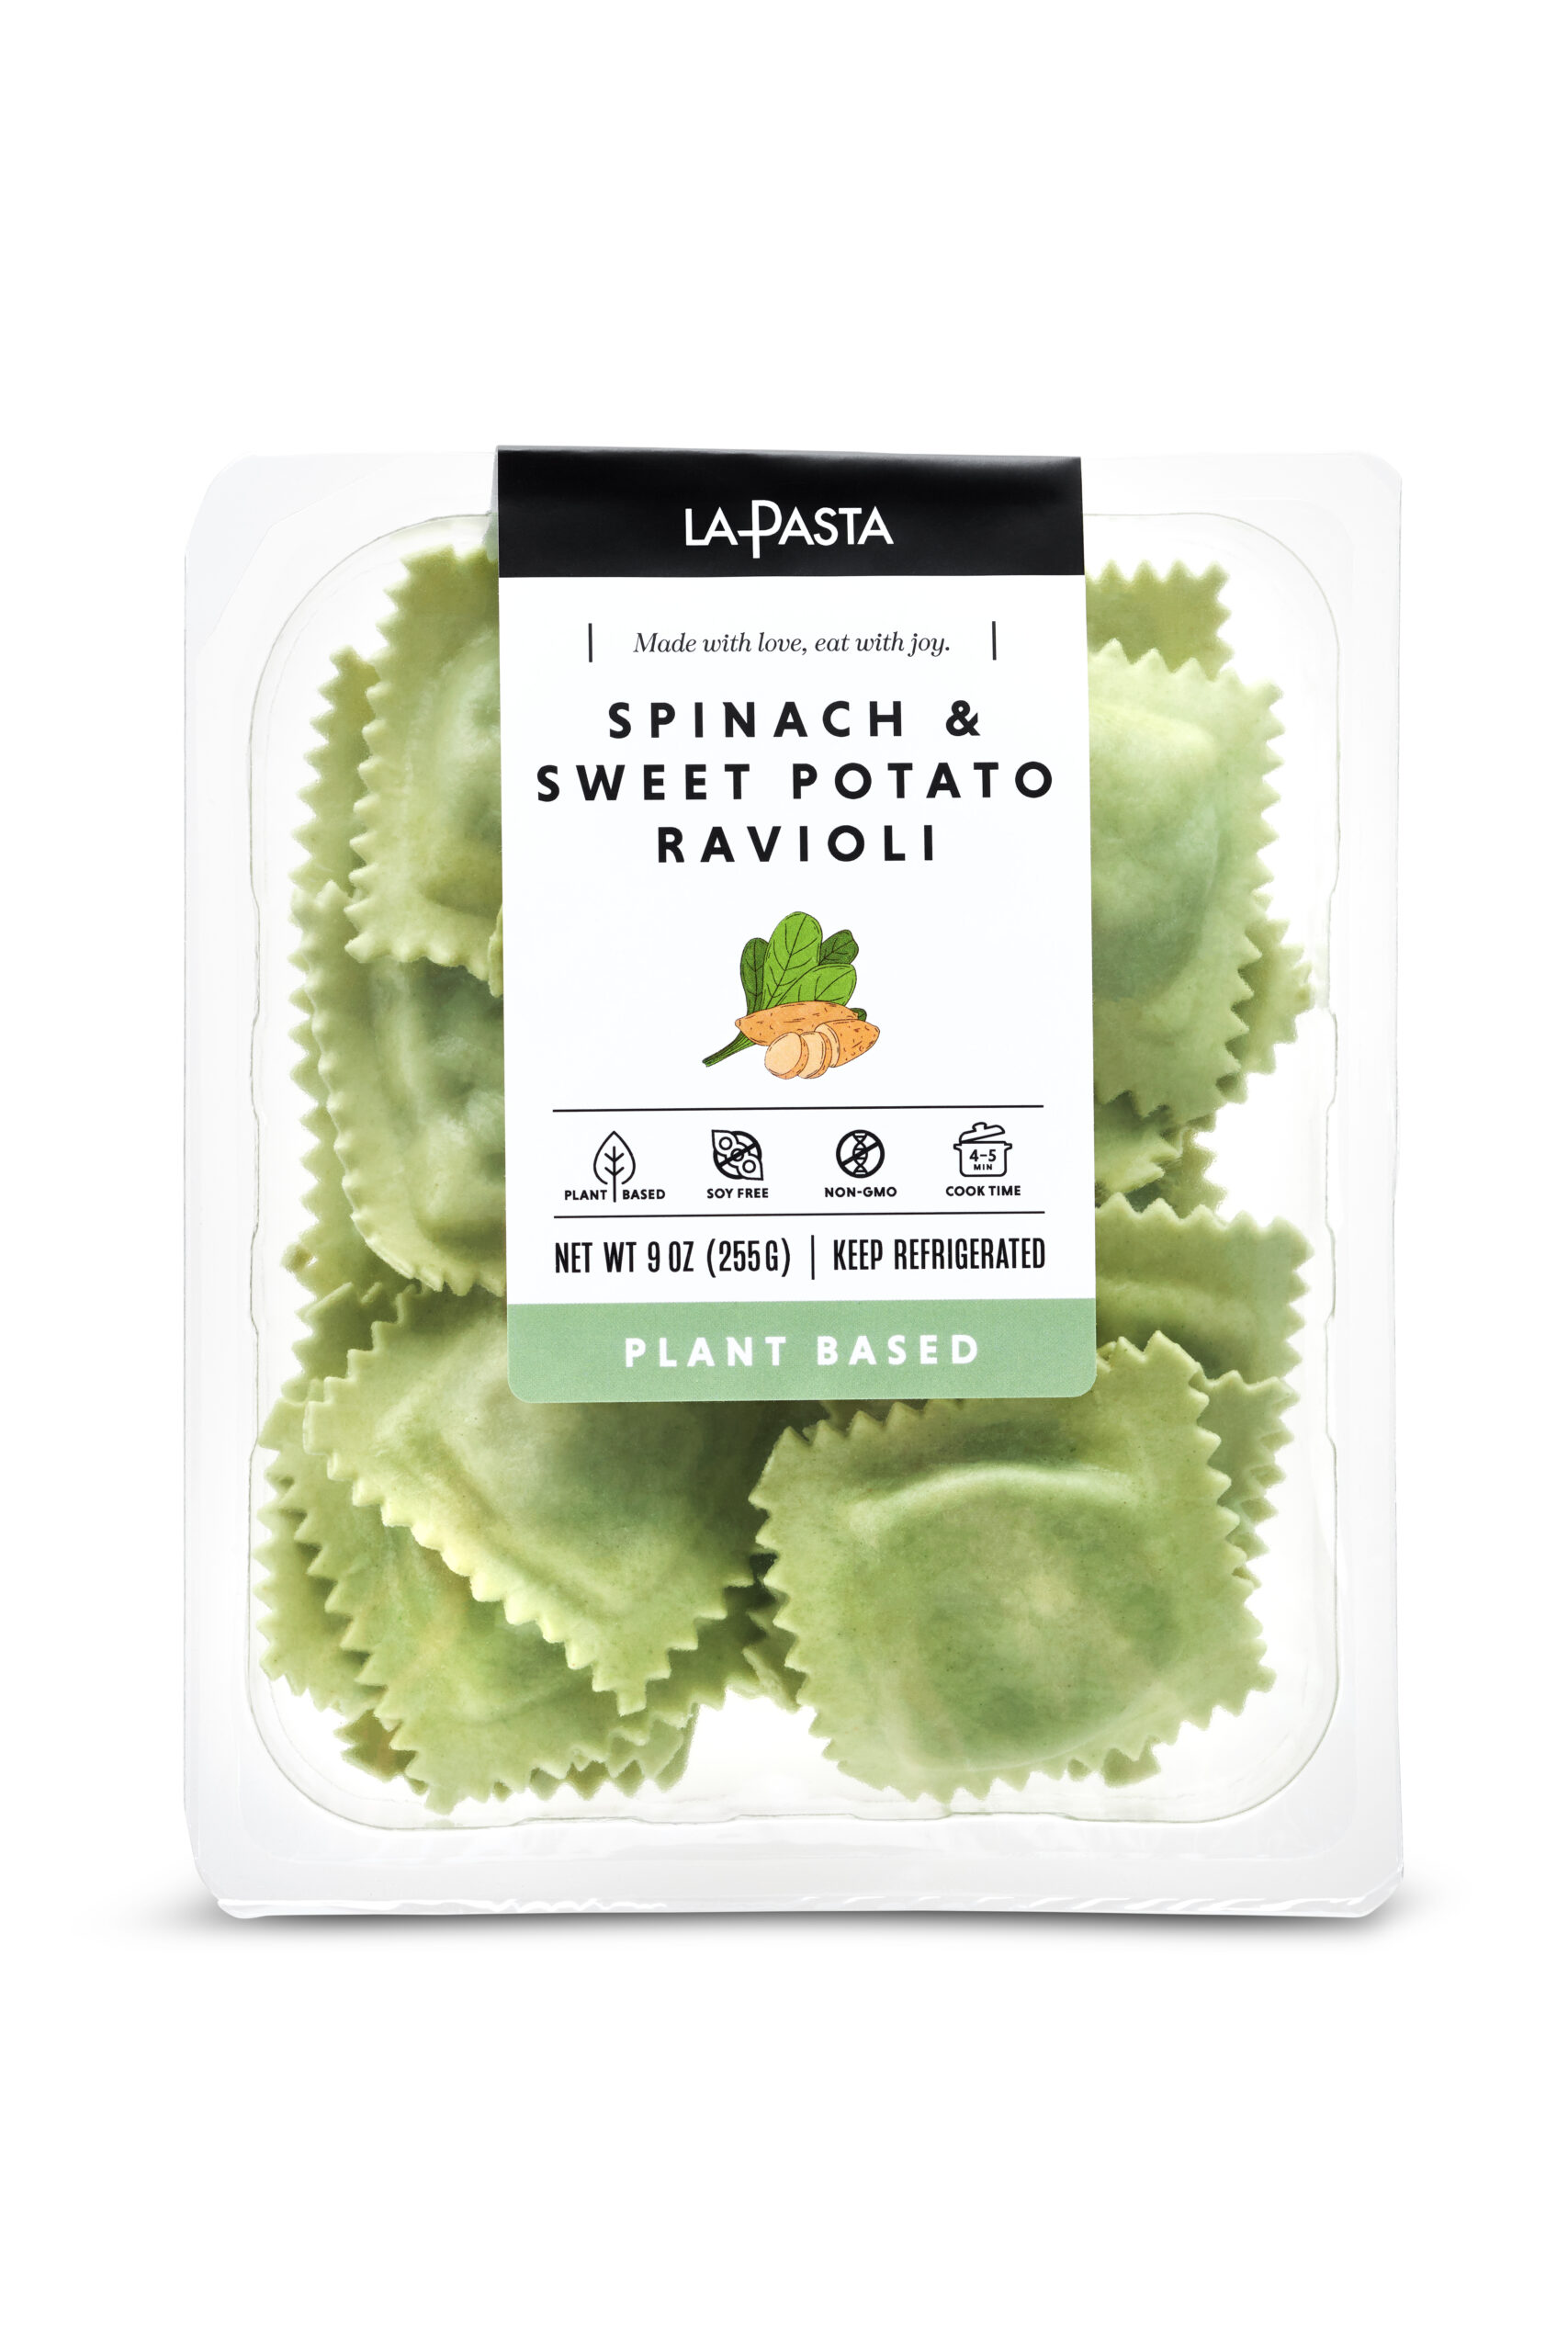 Spinach and sweet potato ravioli packaged in a plastic container.